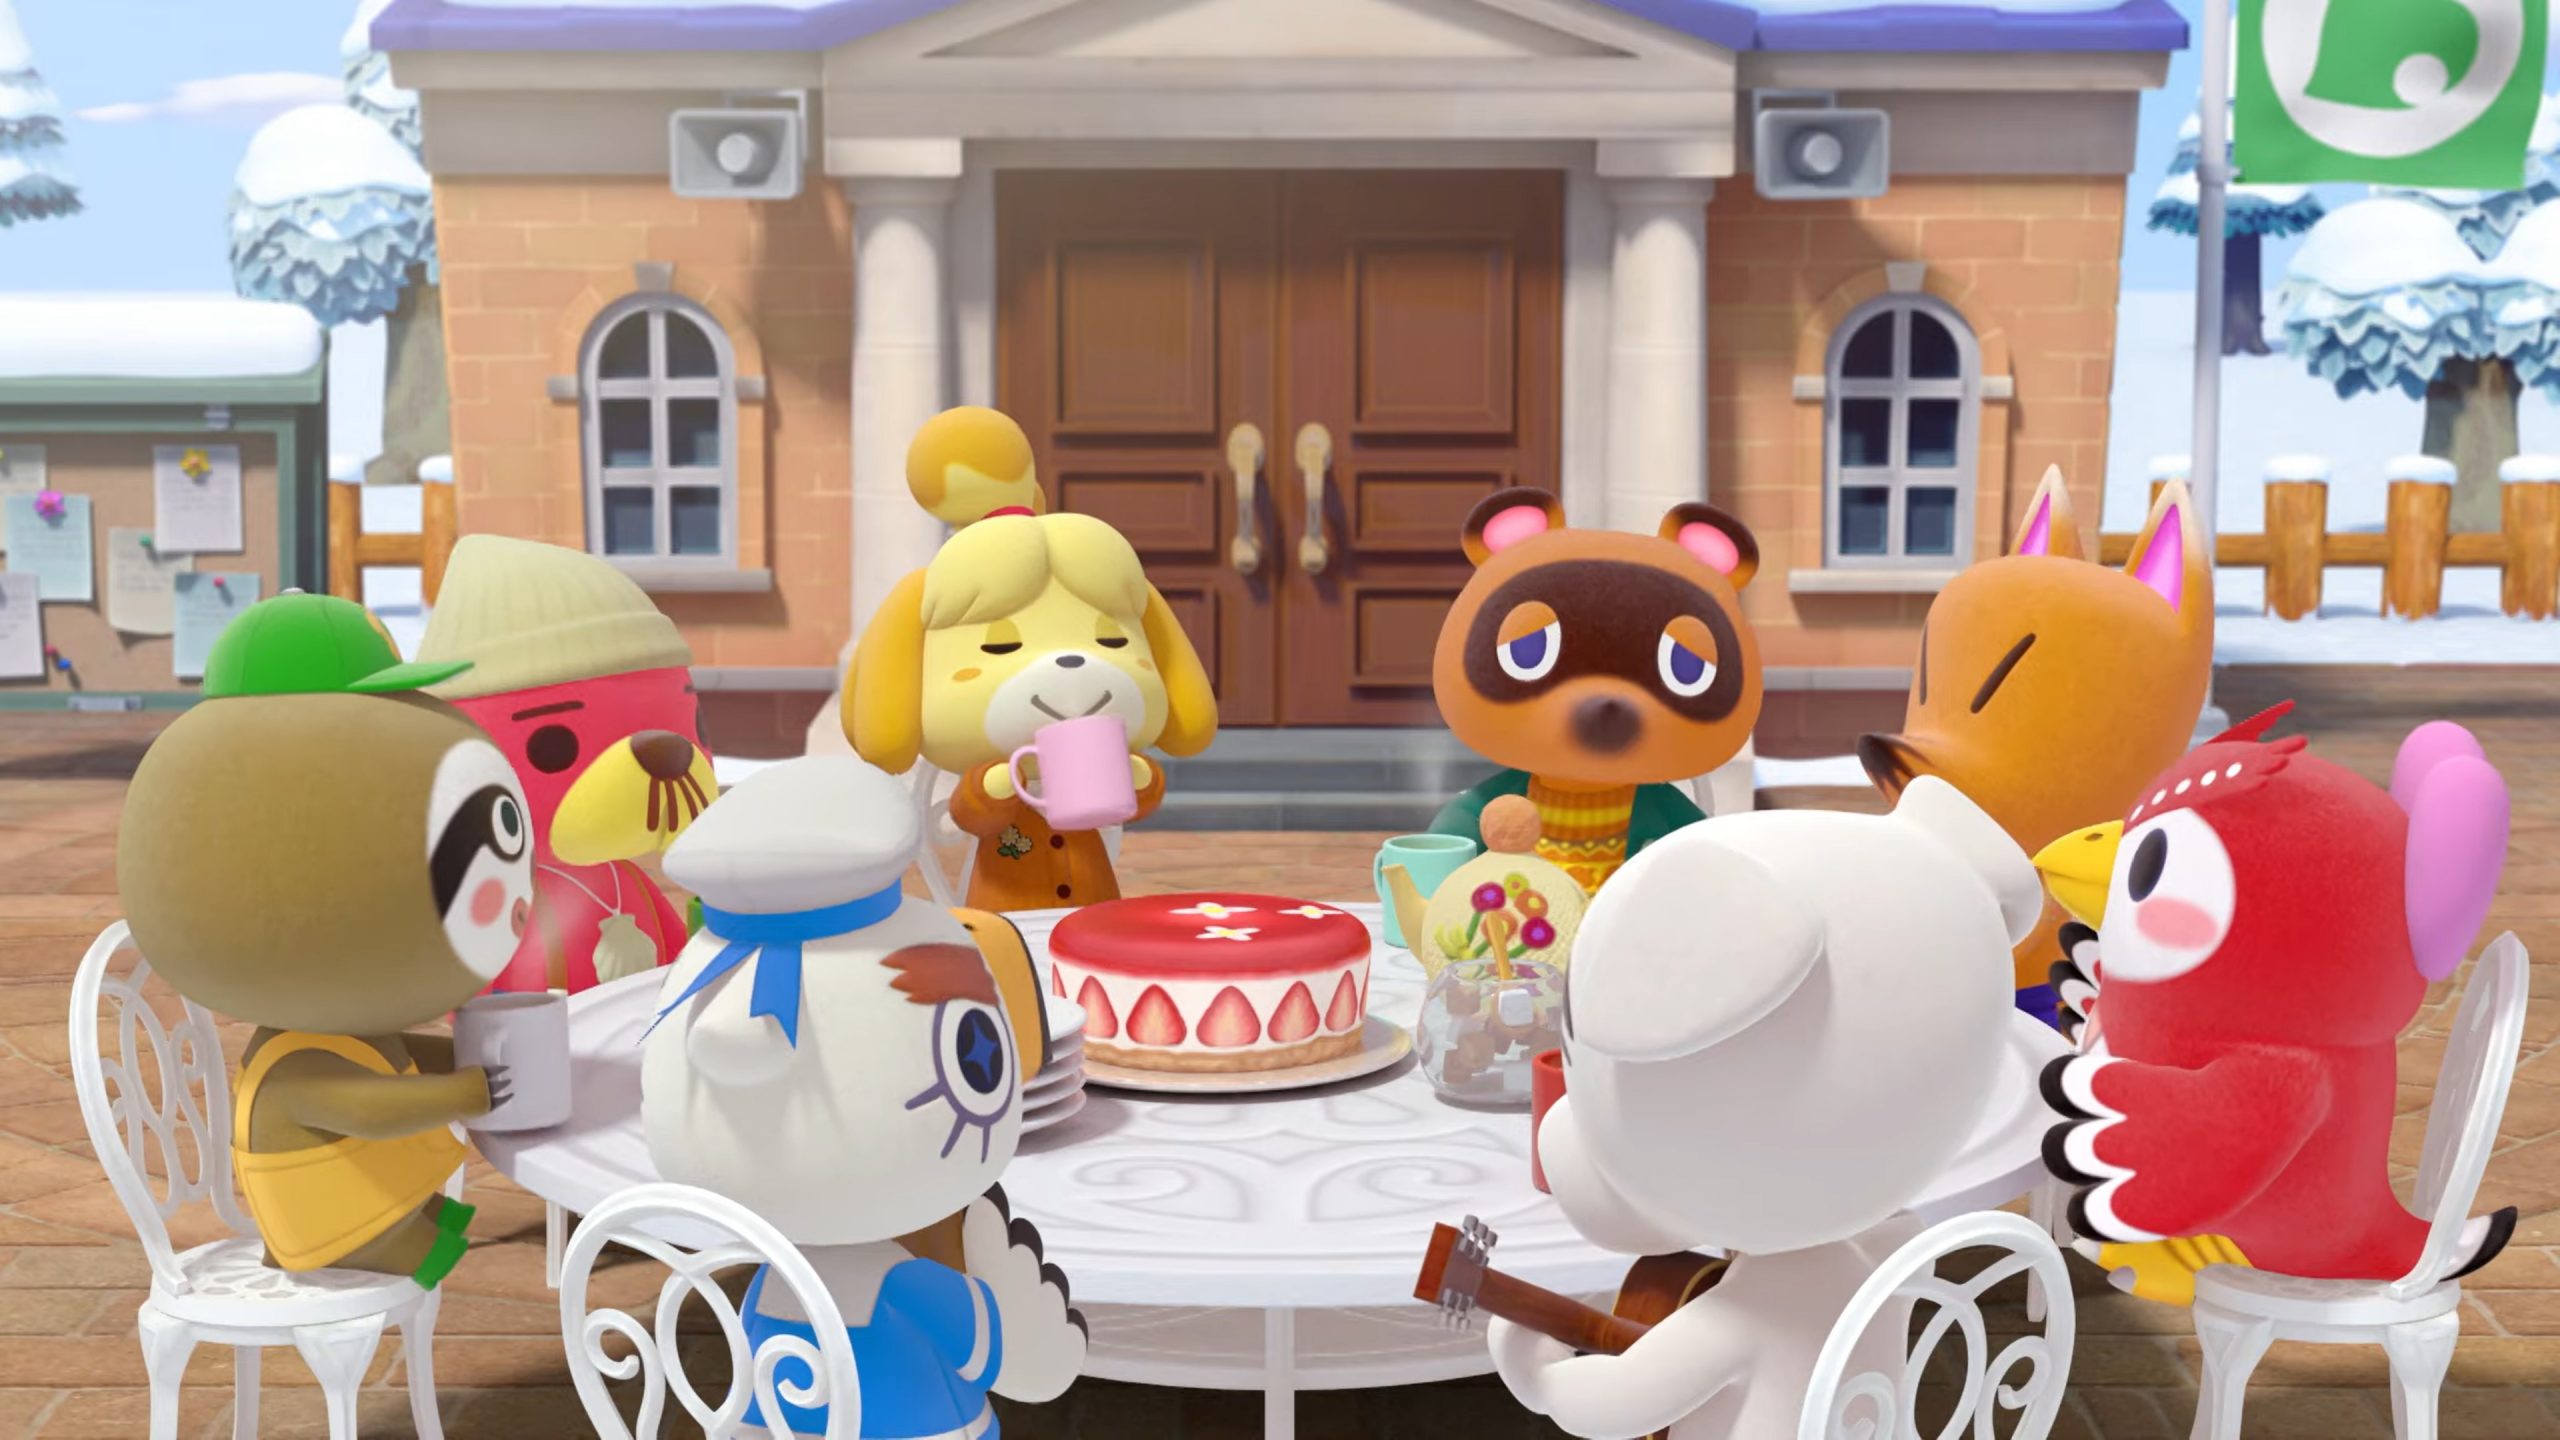 Animal Crossing New Horizons "Your year with Animal Crossing New